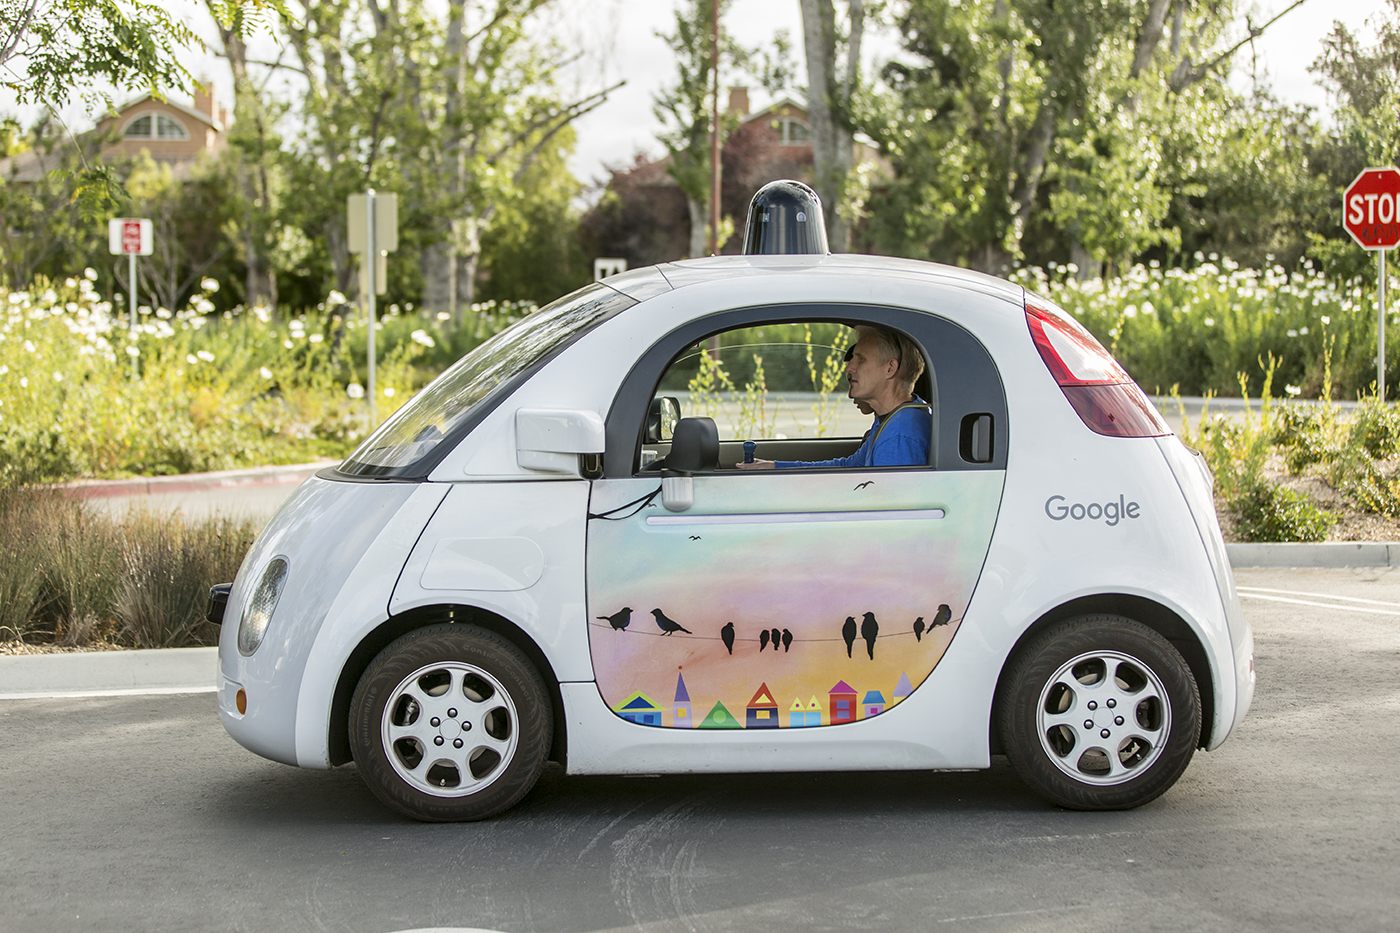 cool looking driverless Google car from UCL website